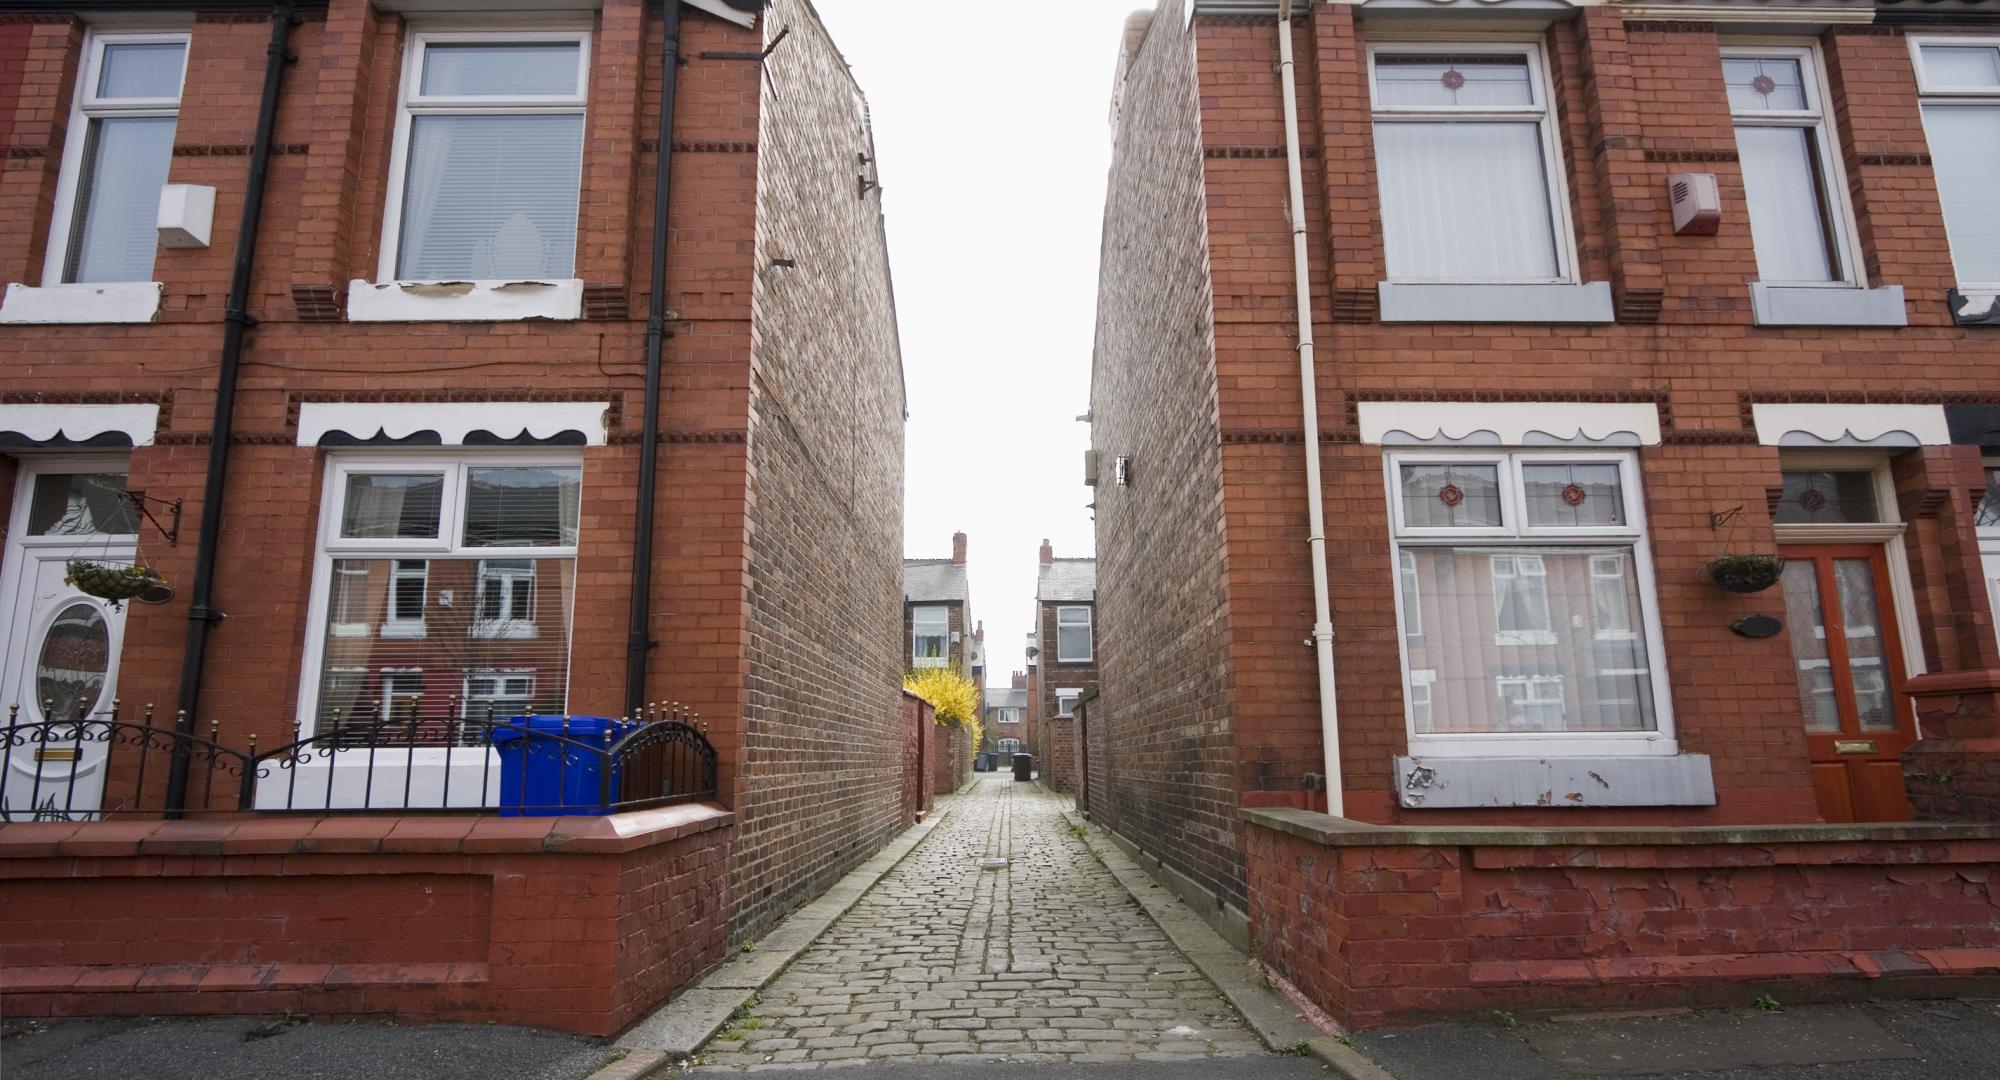 Row of terraced houses in Manchester